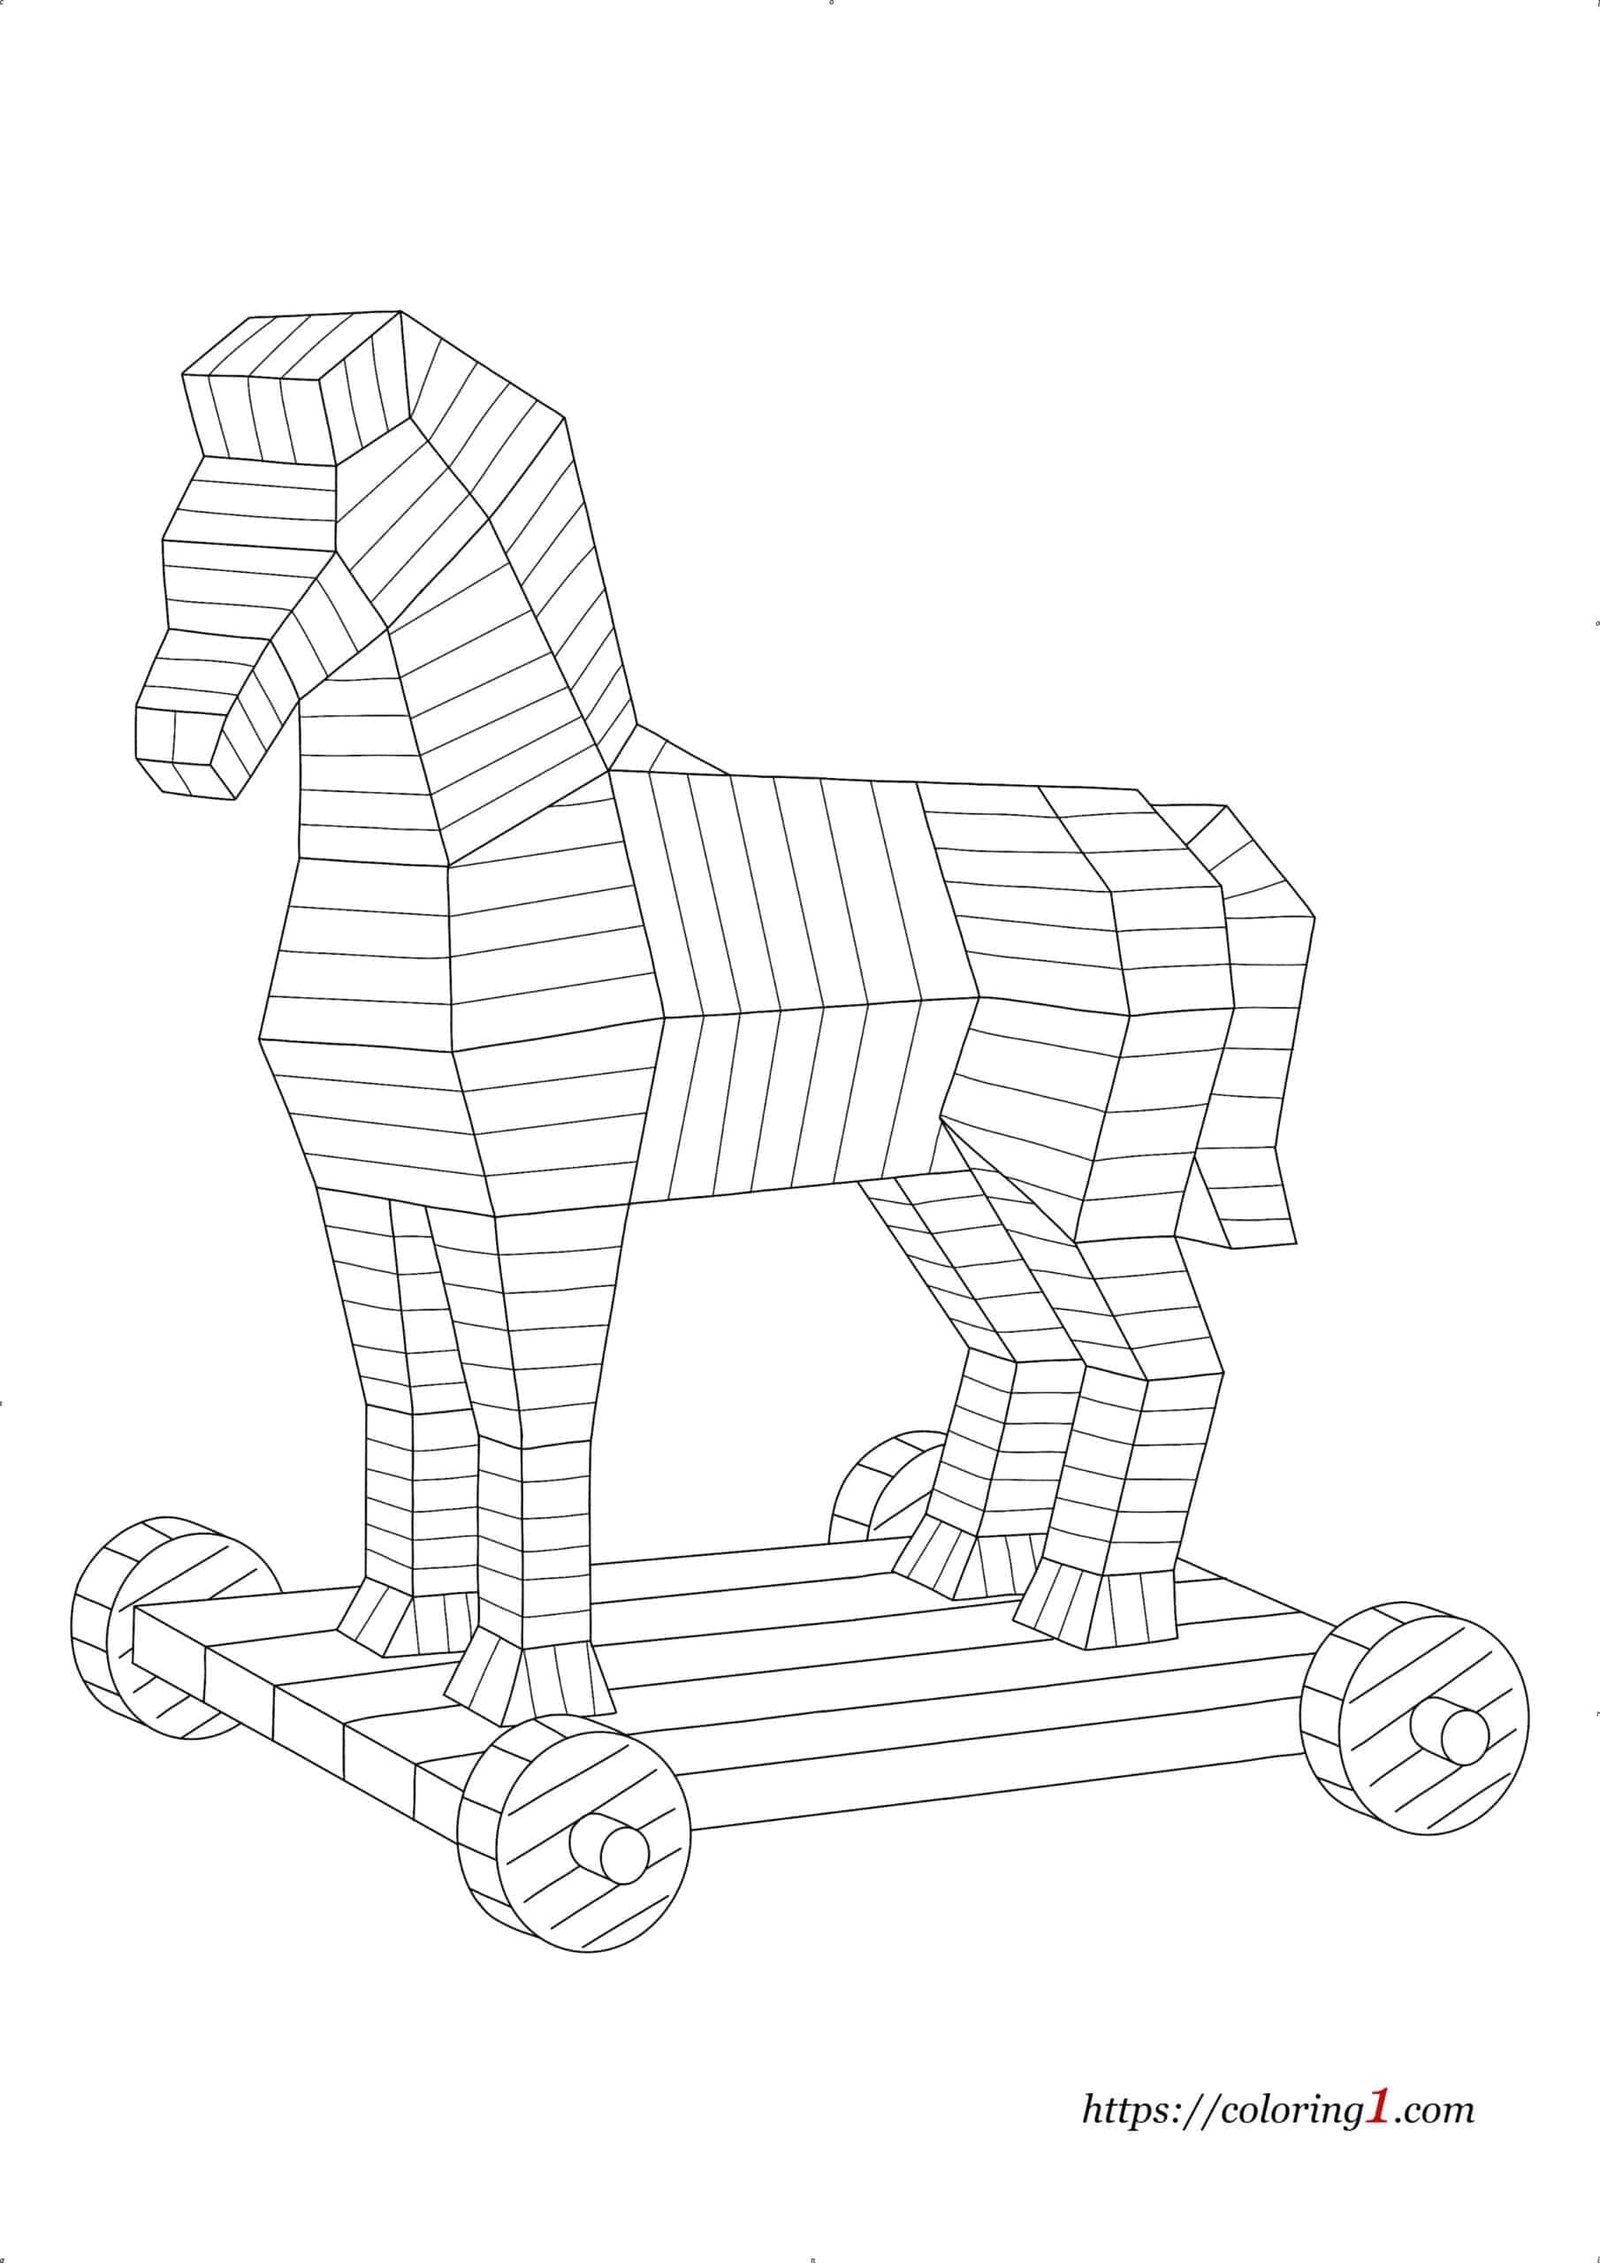 Trojan Horse coloring page